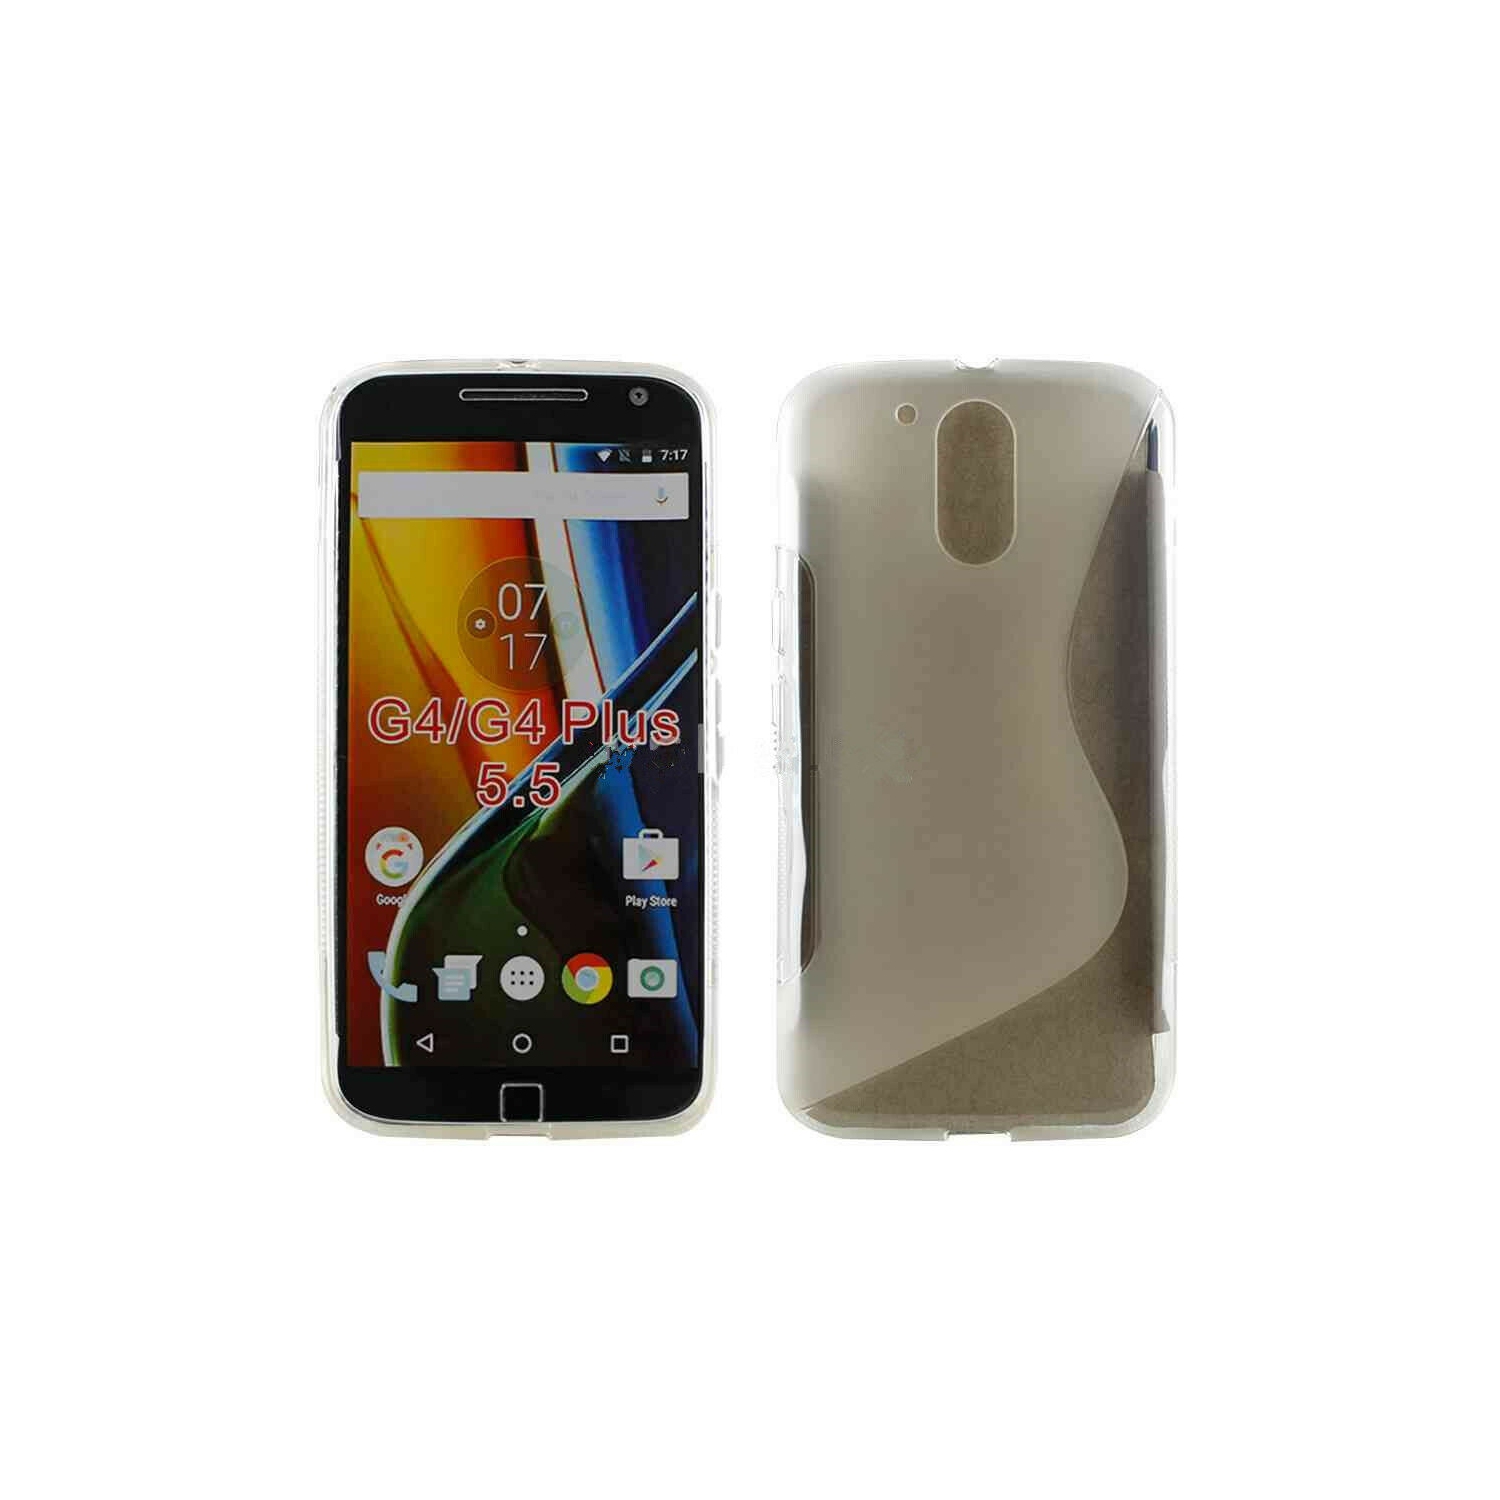 【CSmart】 Ultra Thin Soft TPU Silicone Jelly Bumper Back Cover Case for Motorola G4 Play, Clear